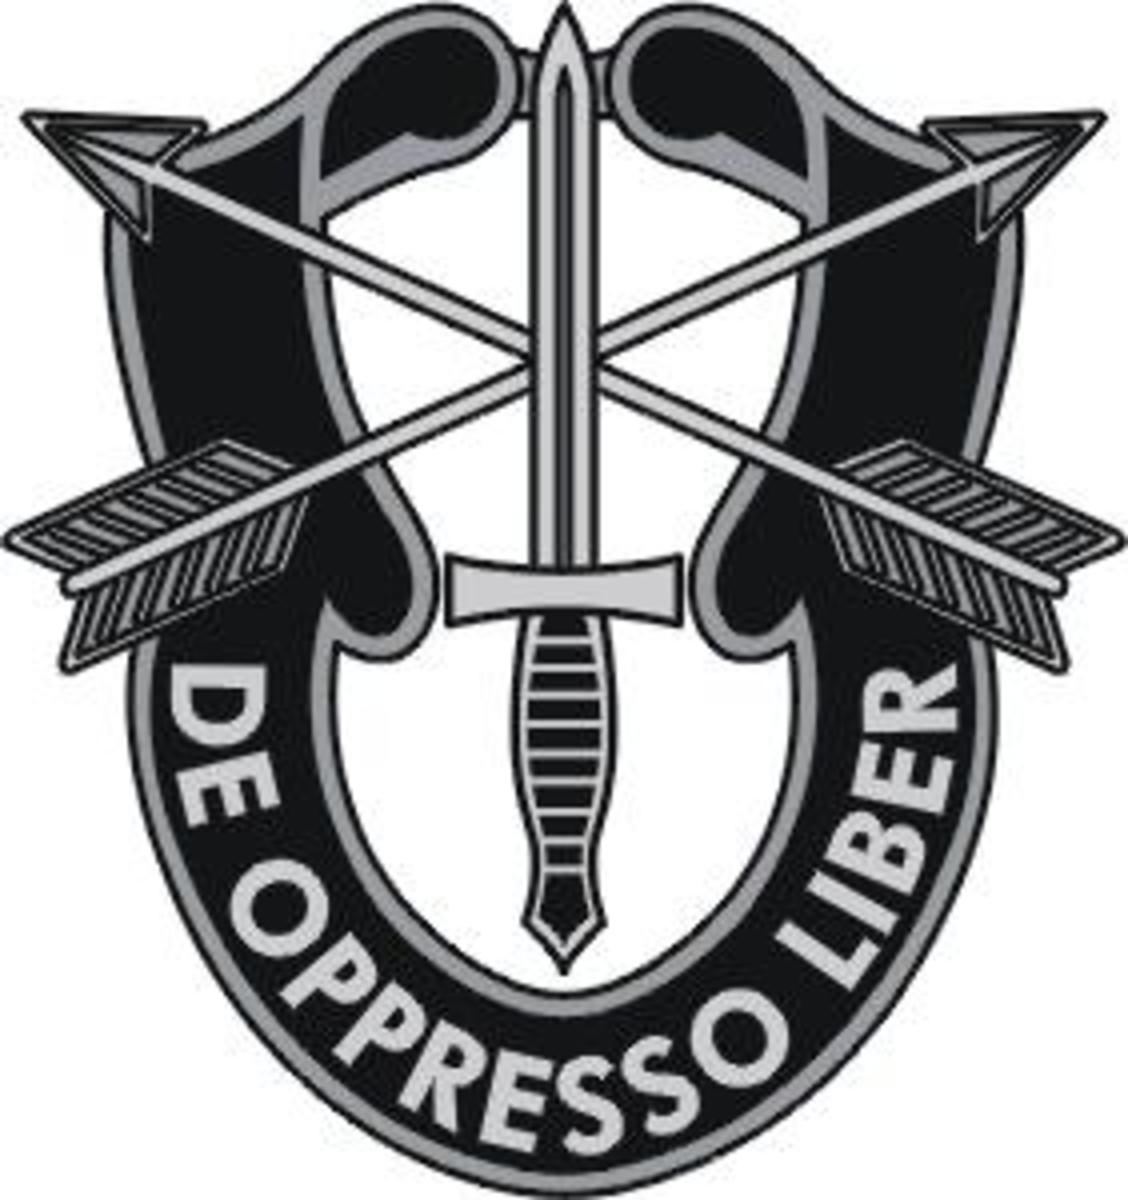 Special Forces insignia and motto, which means "to liberate the oppressed"